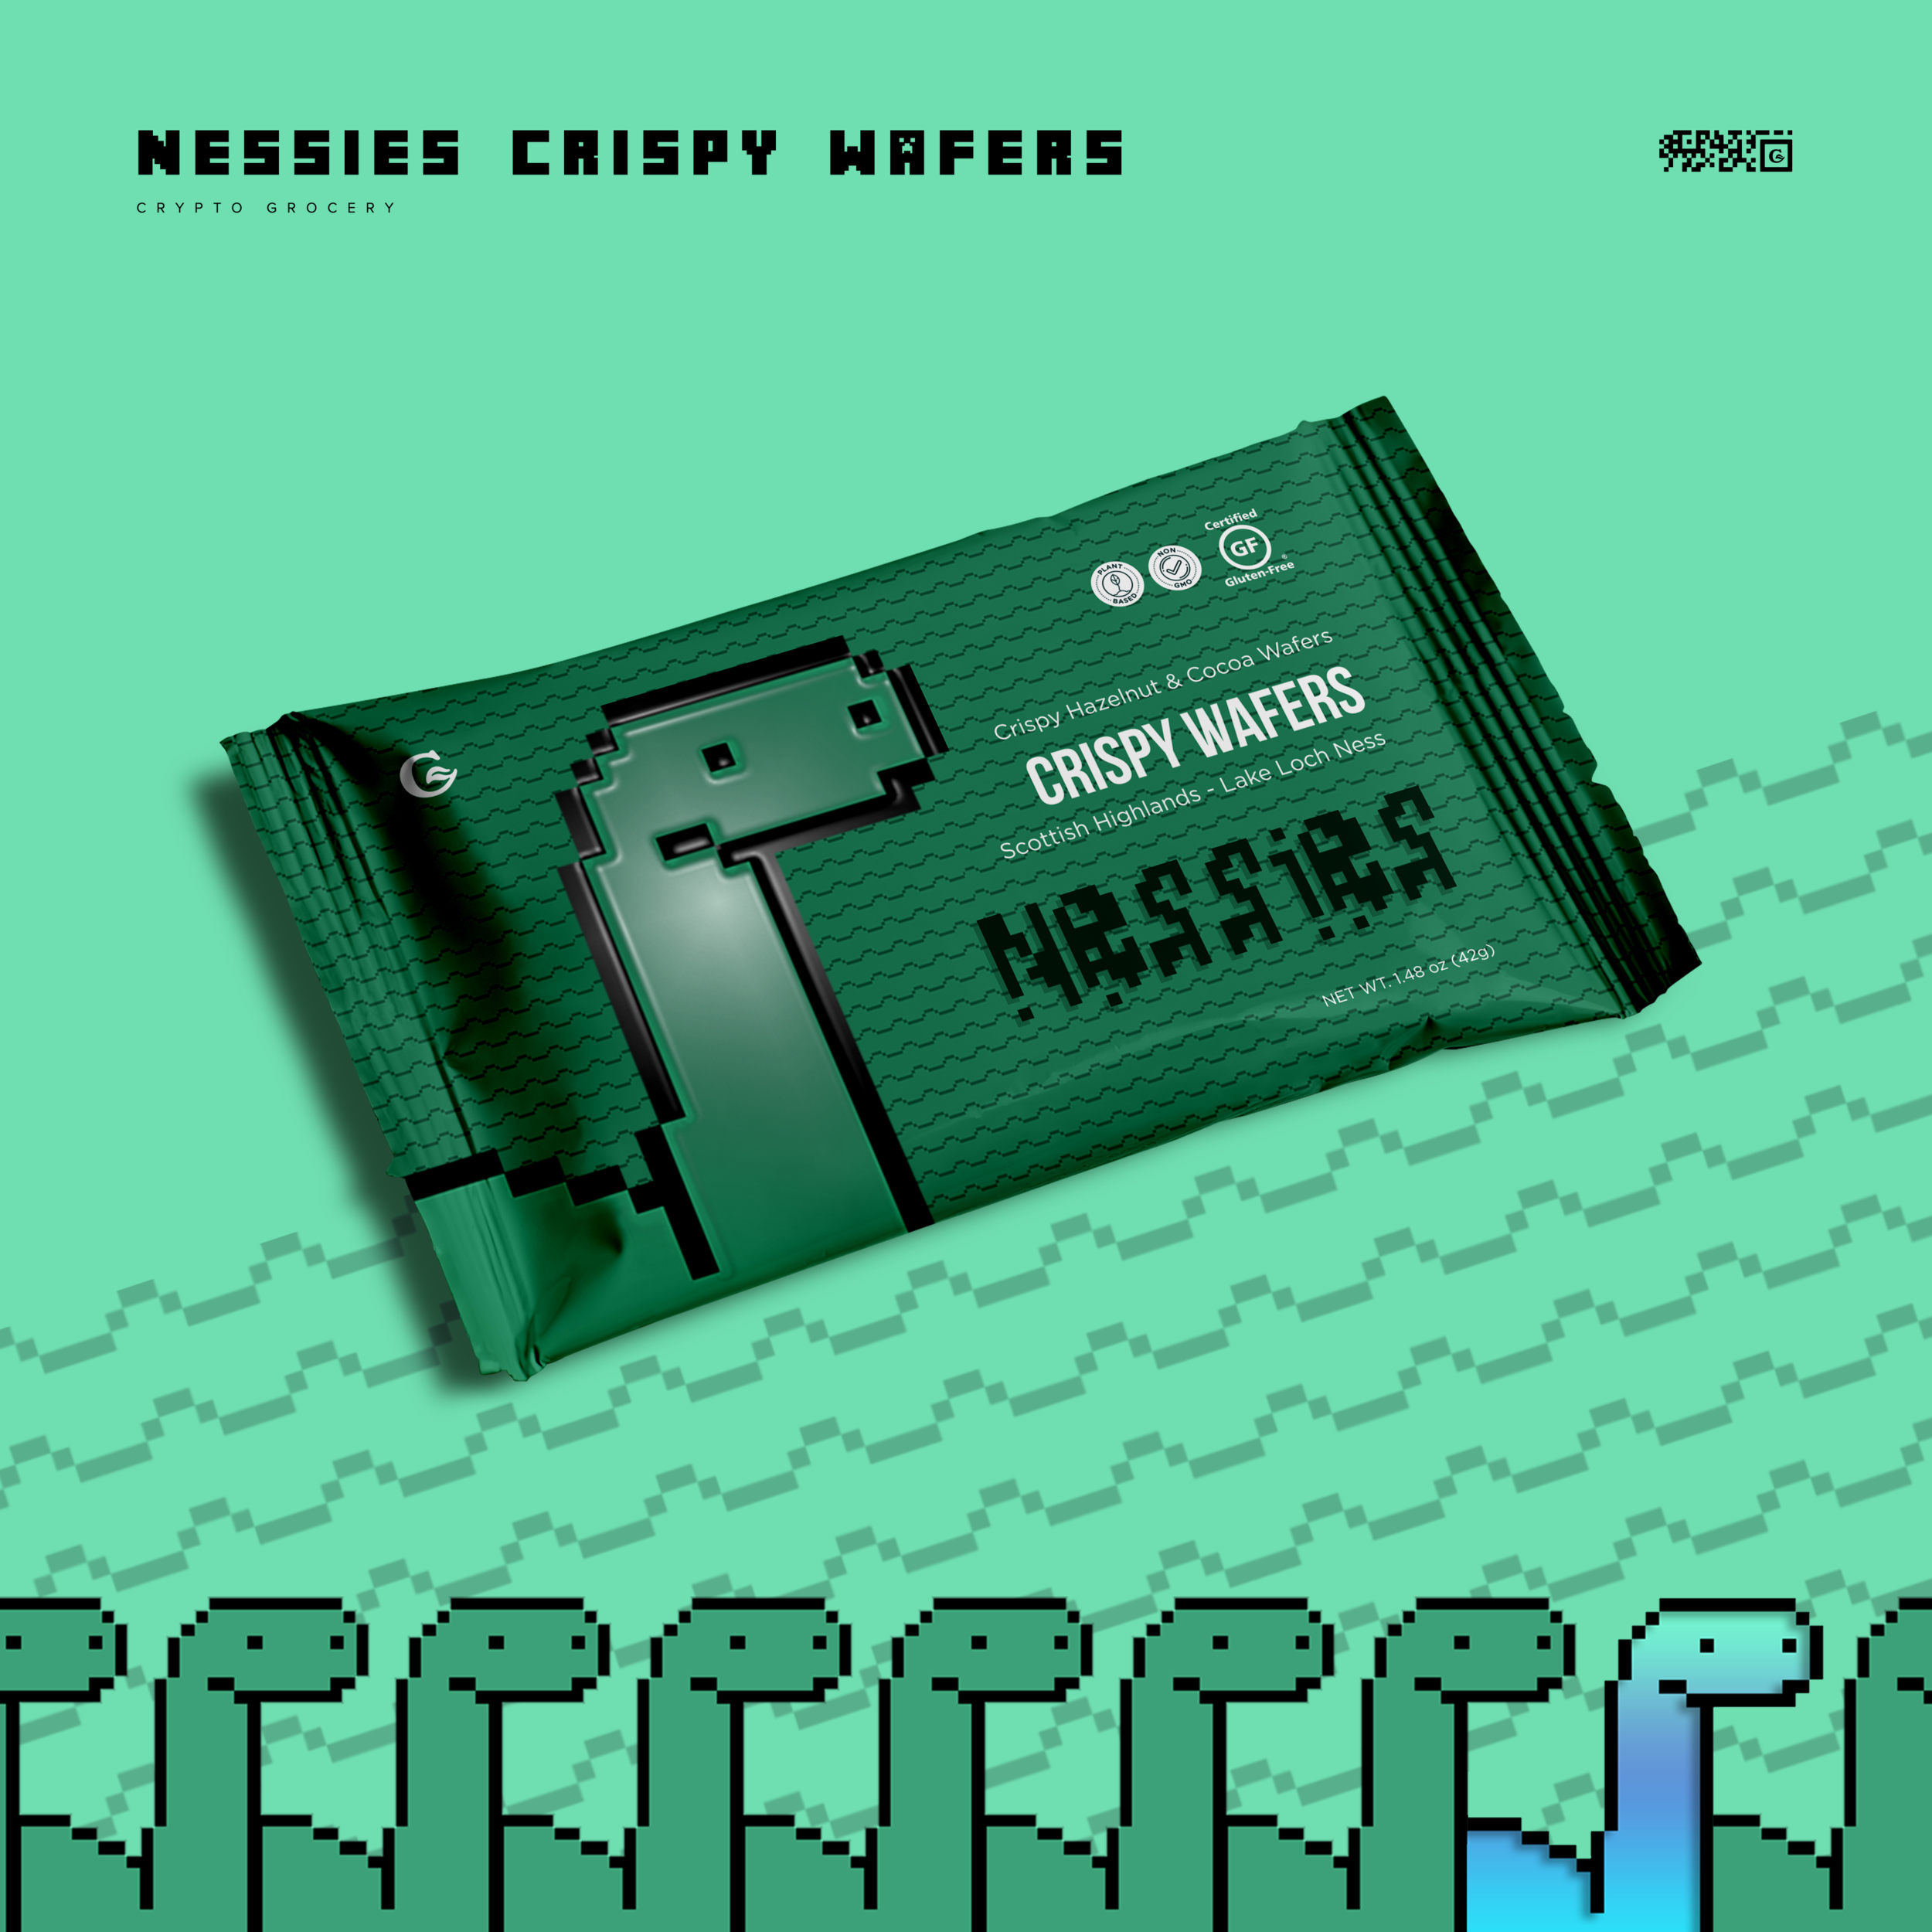 2M_NESSIE-WAFERS.png